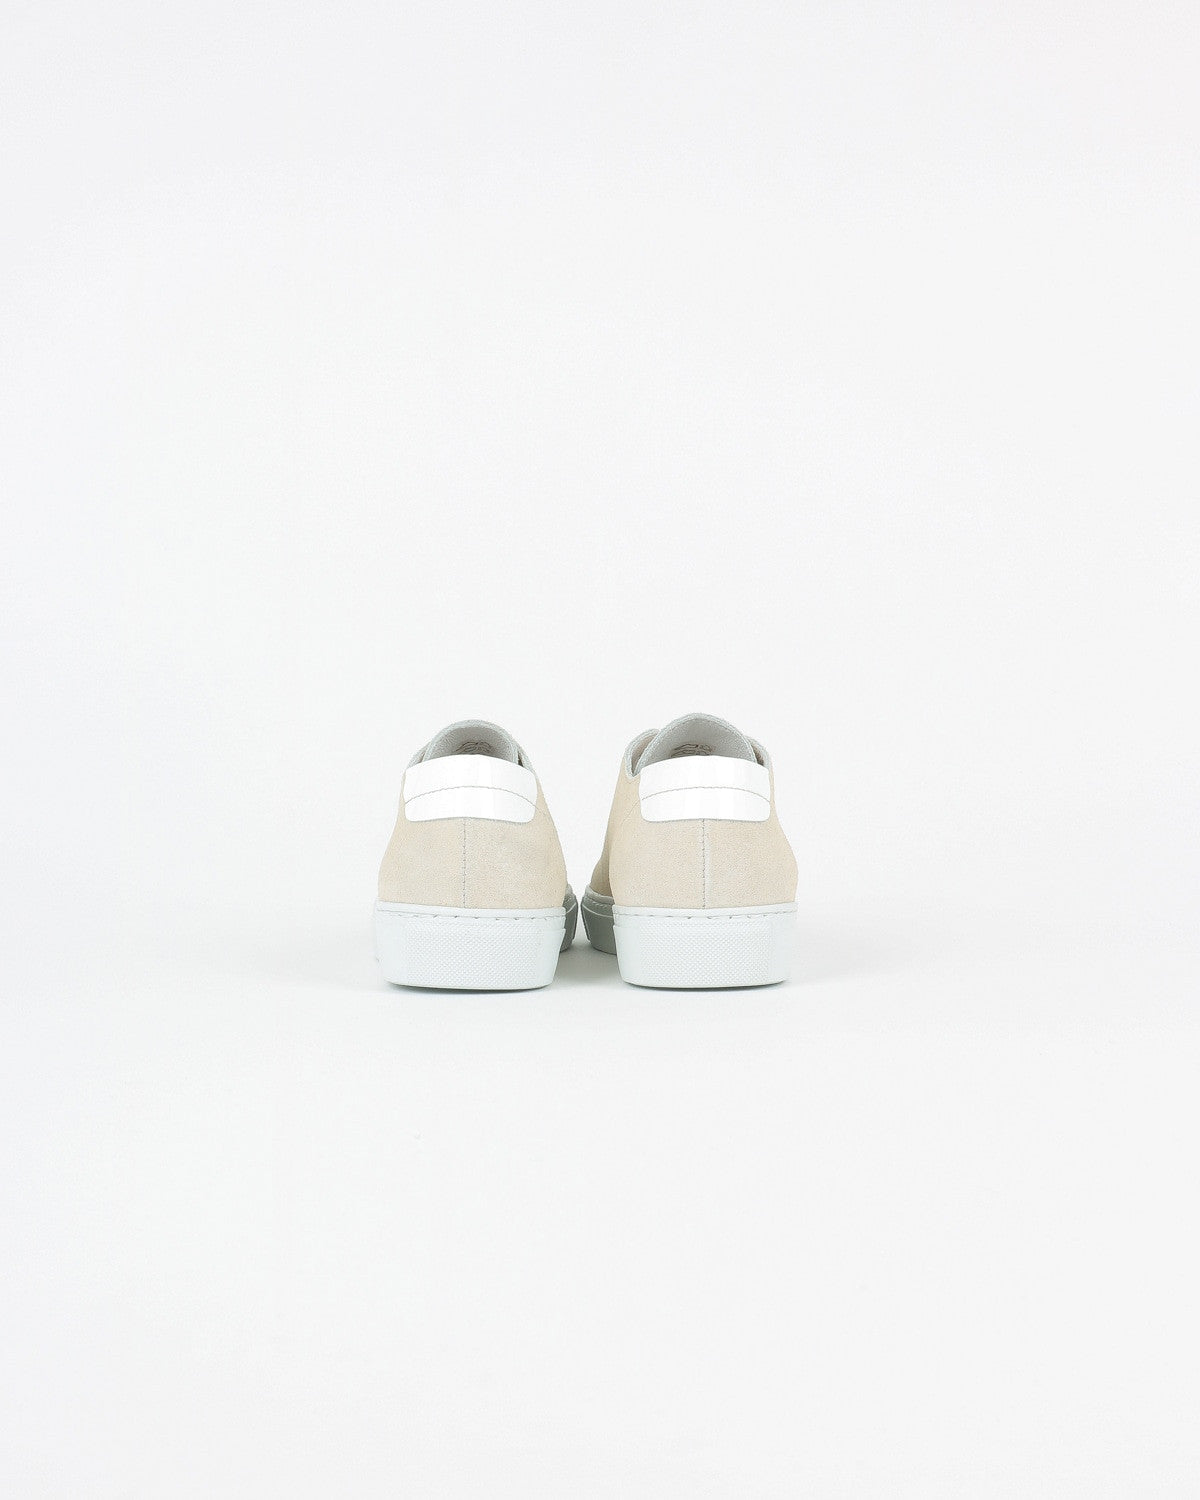 garment project_classic lace sneaker_offwhite suede_view_3_4